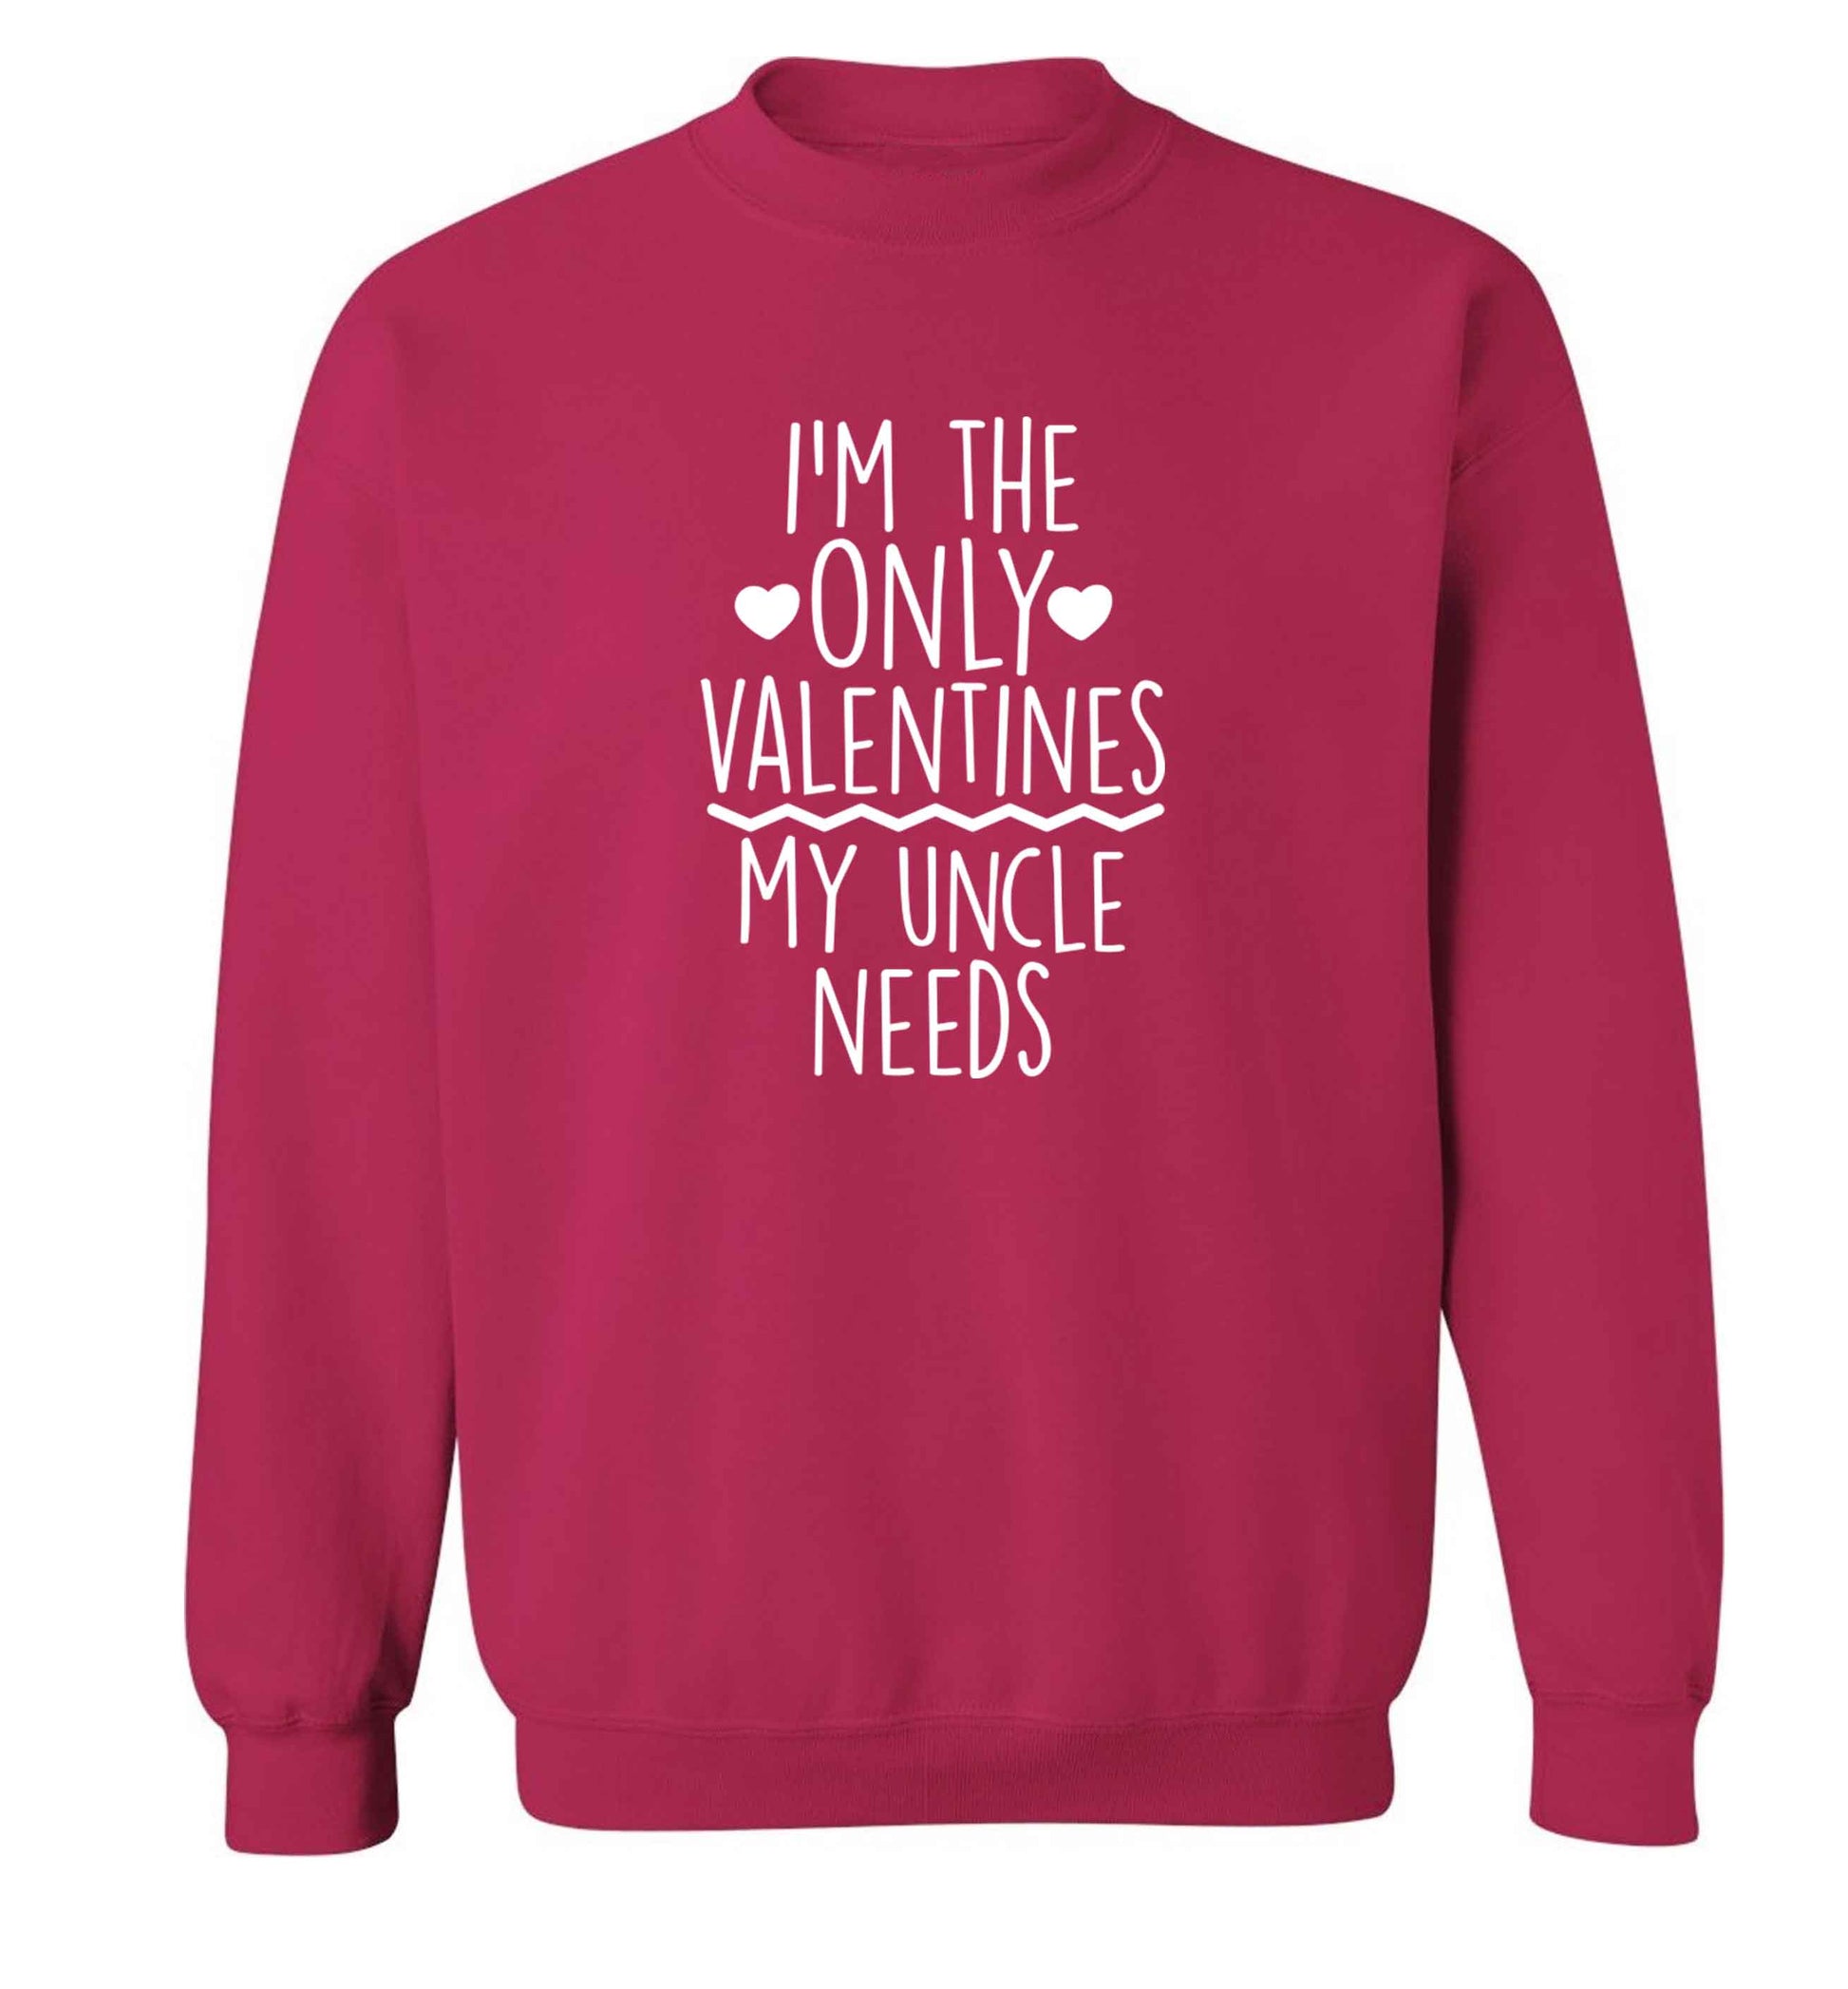 I'm the only valentines my uncle needs adult's unisex pink sweater 2XL